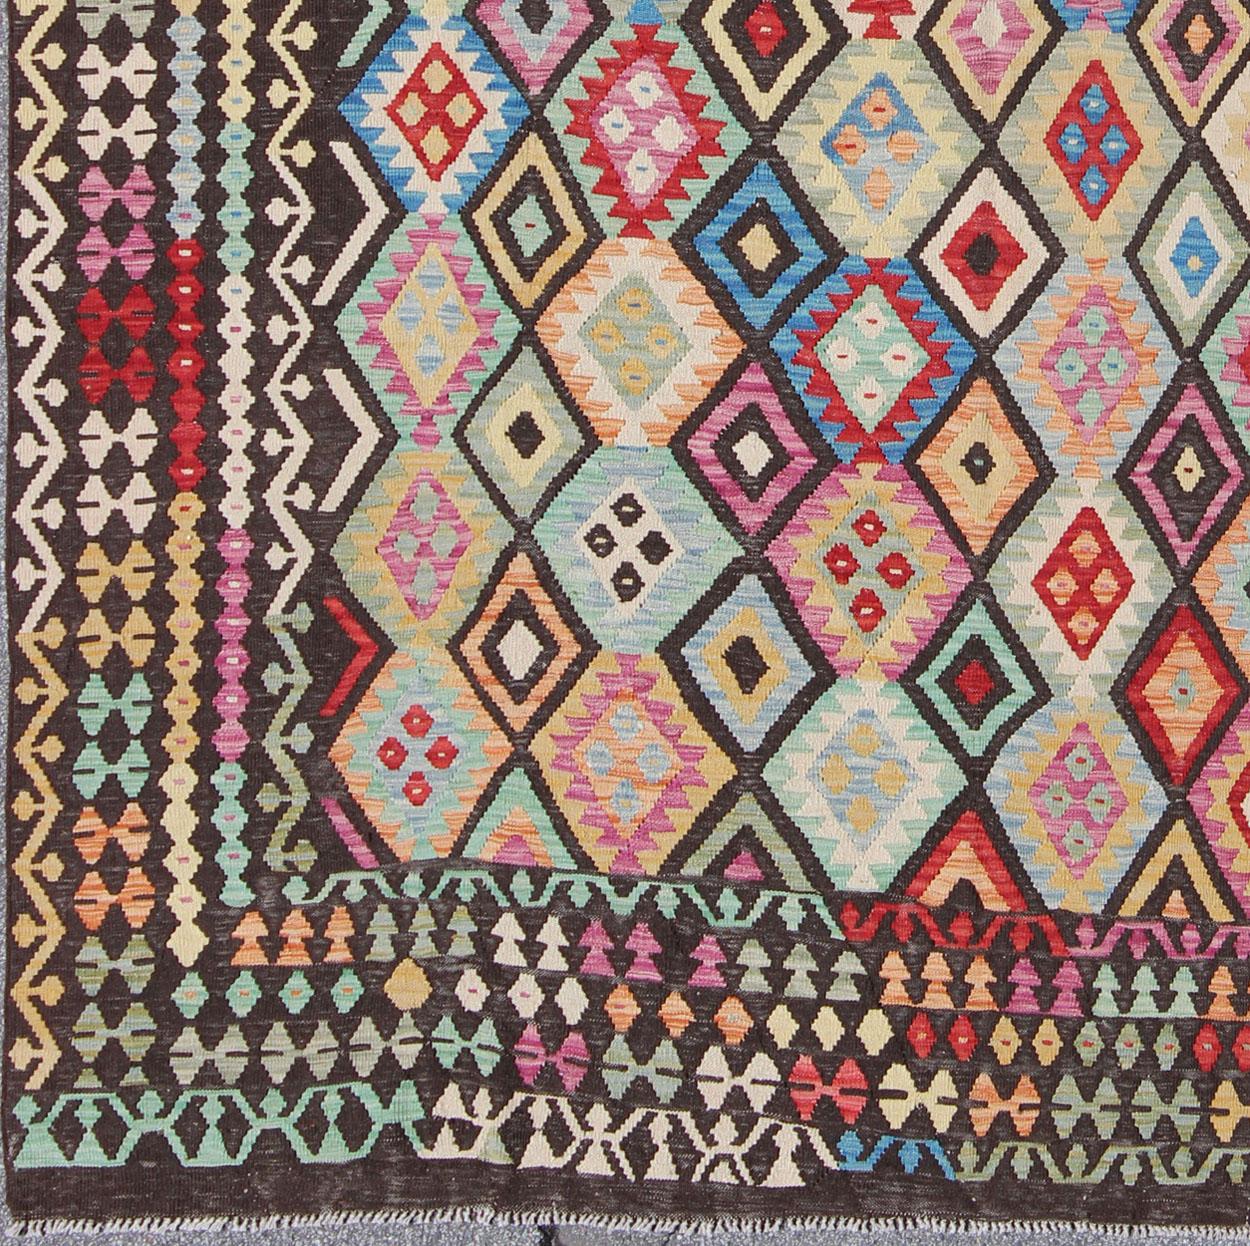 Afghan Colorful Tribal Kilim Flat Weave Rug with Chocolate Brown & Bright Multi Colors For Sale